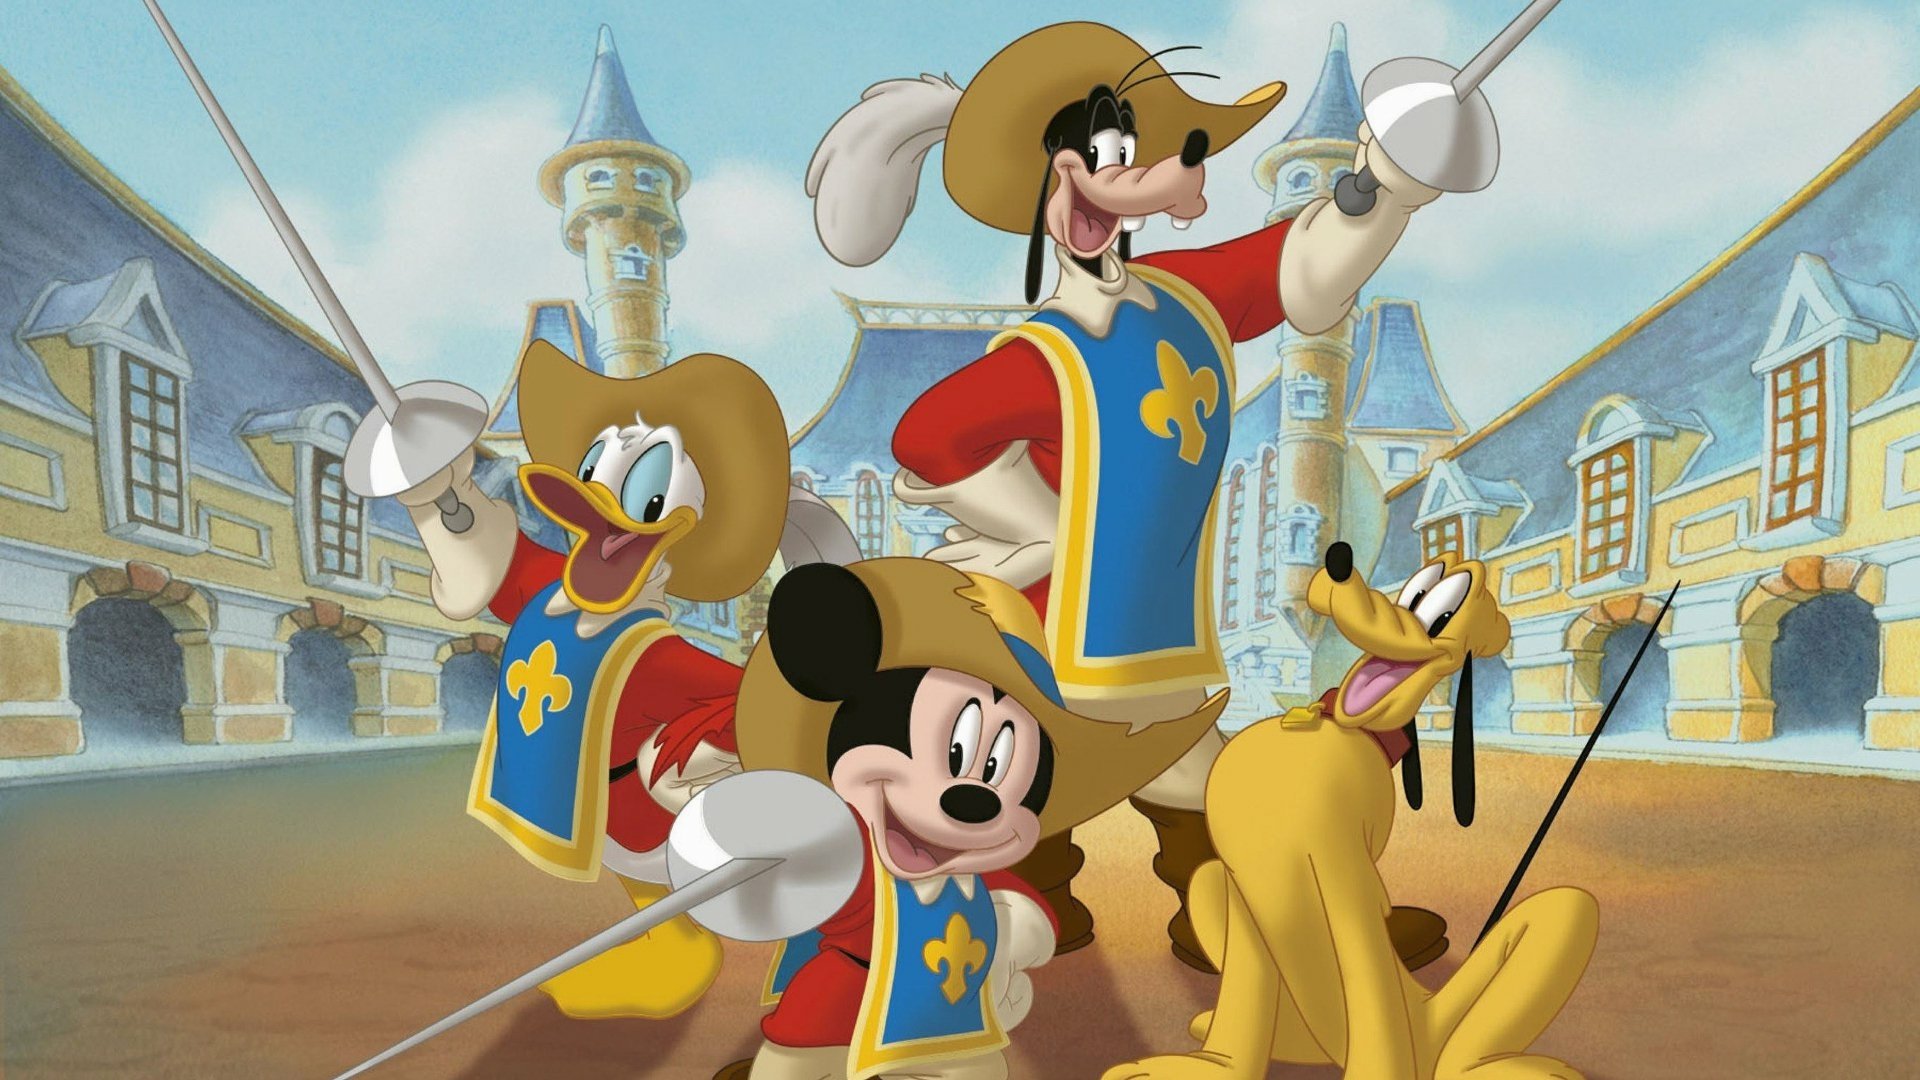 Mickey Donald Goofy The Three Musketeers Wallpaper